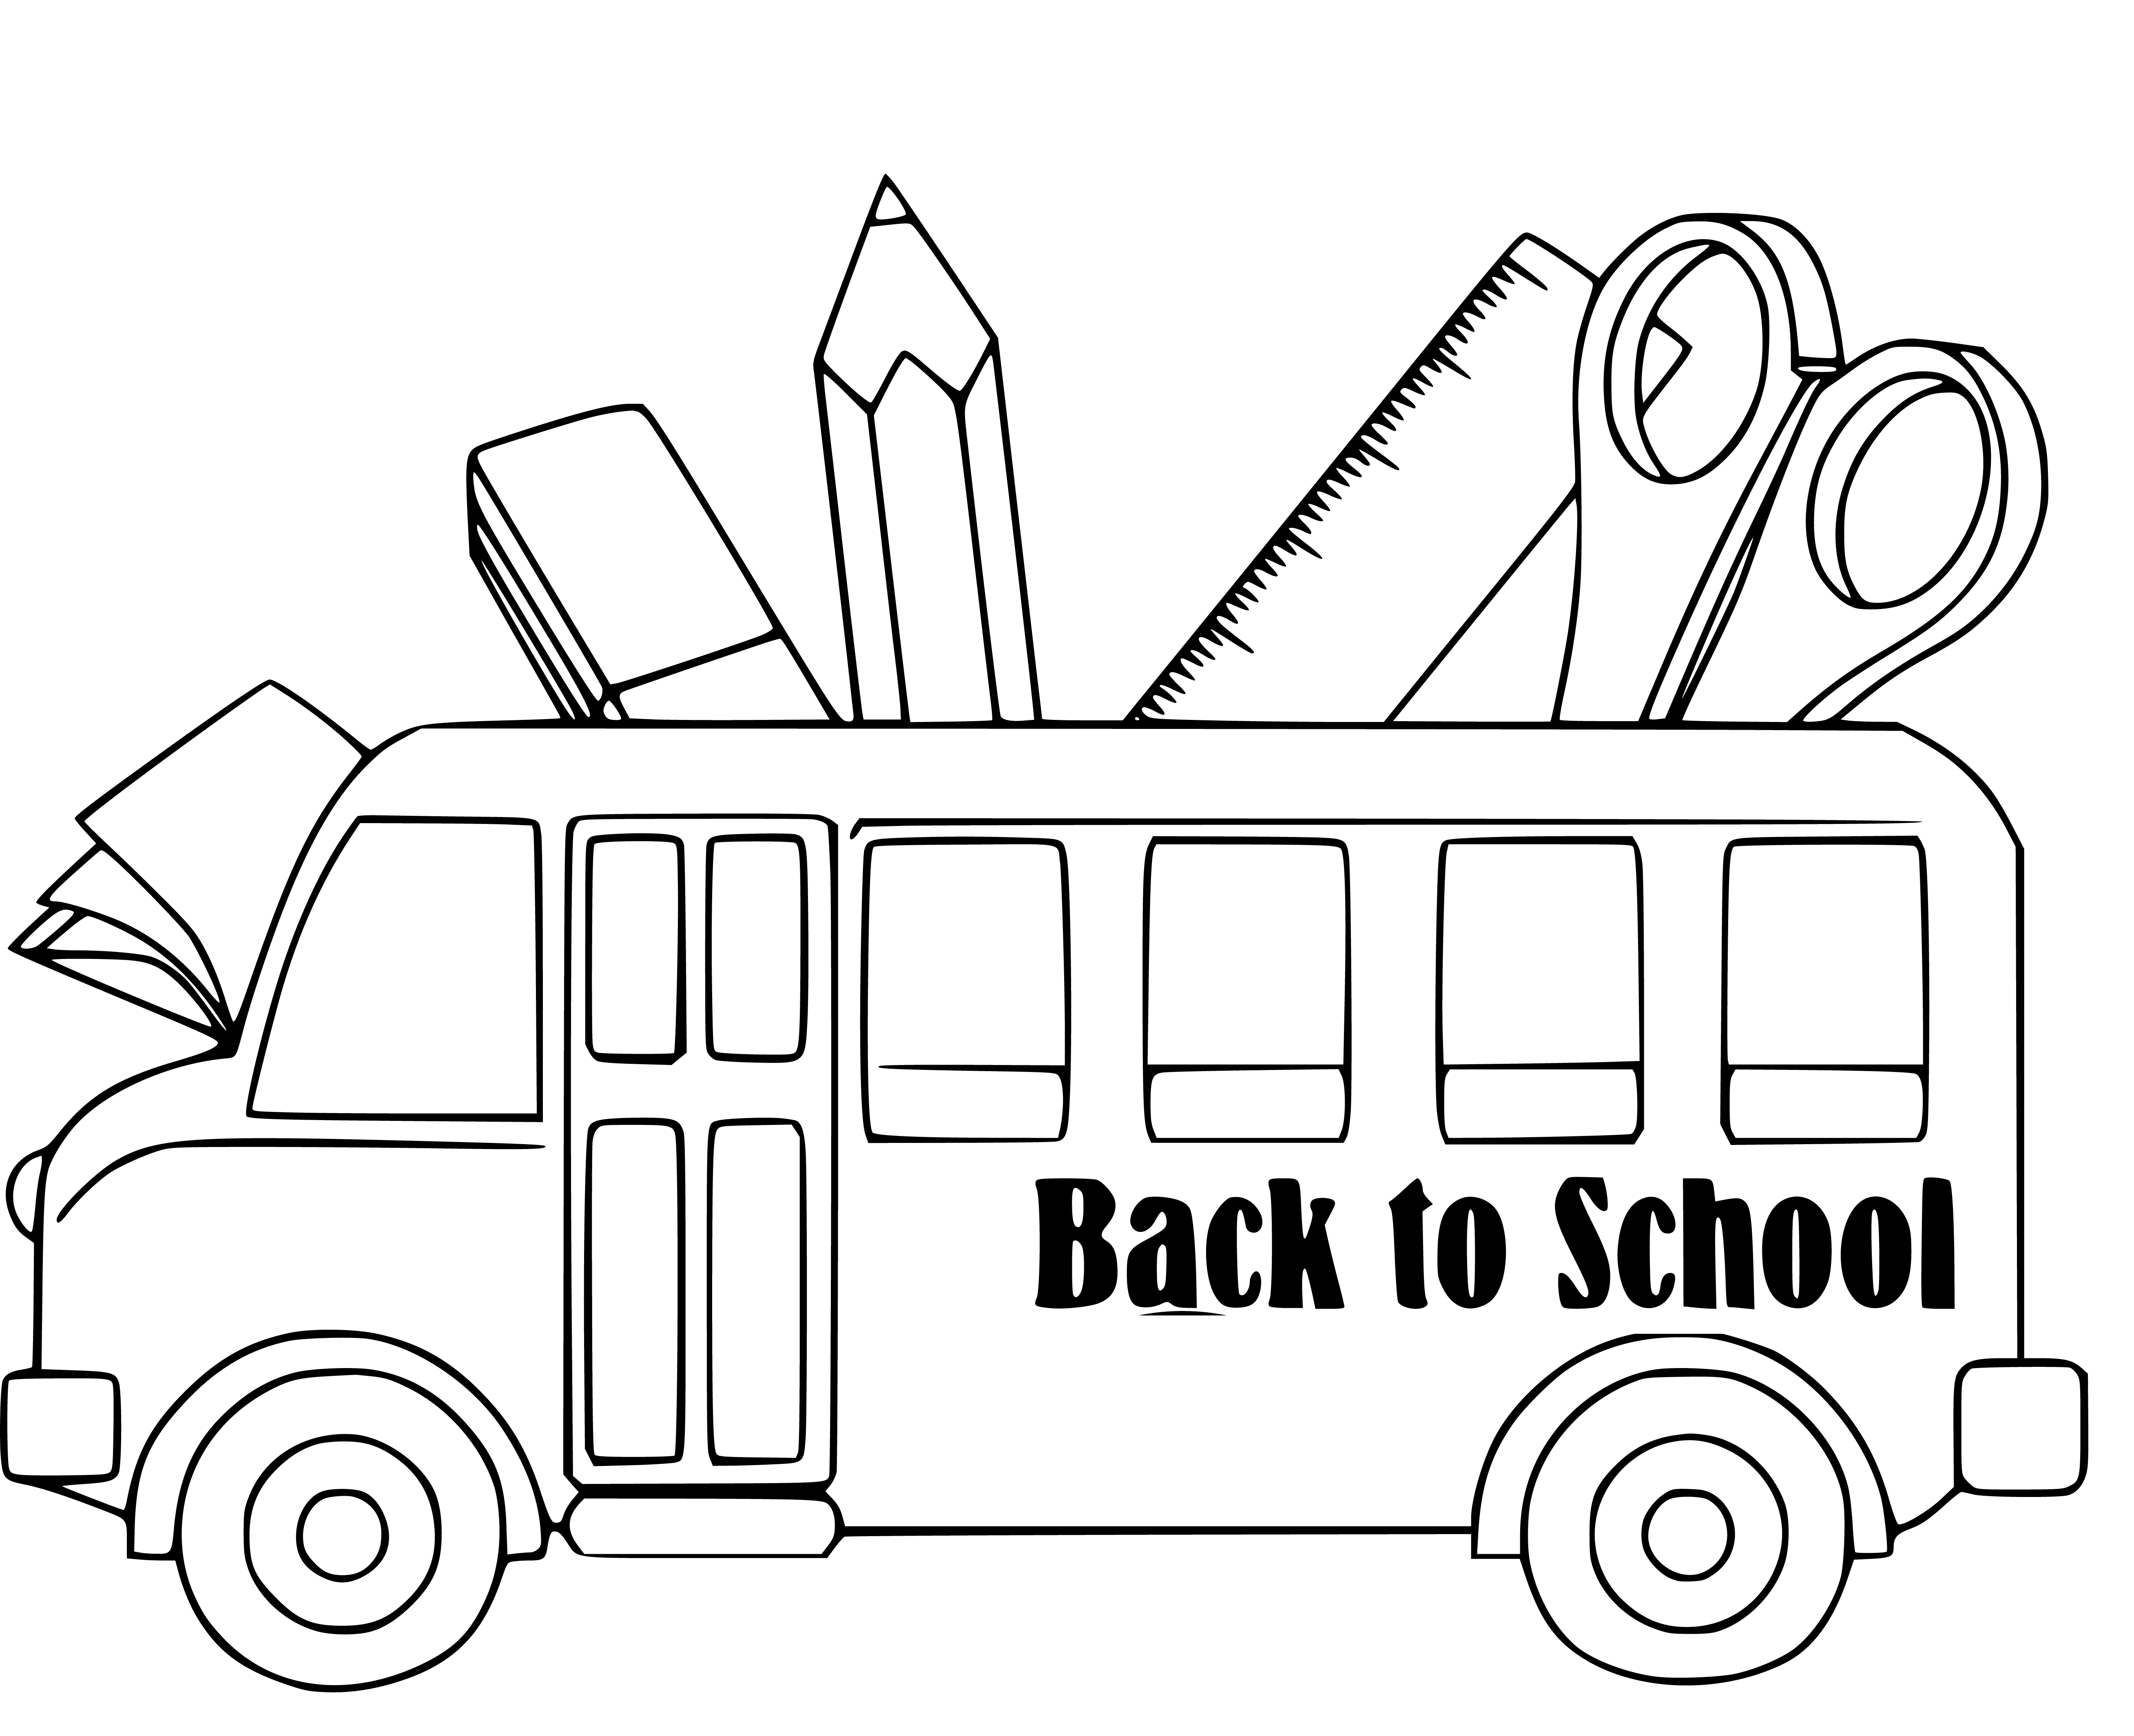 Back to School Bus Coloring Pages for Kids Printable - SheetalColor.com